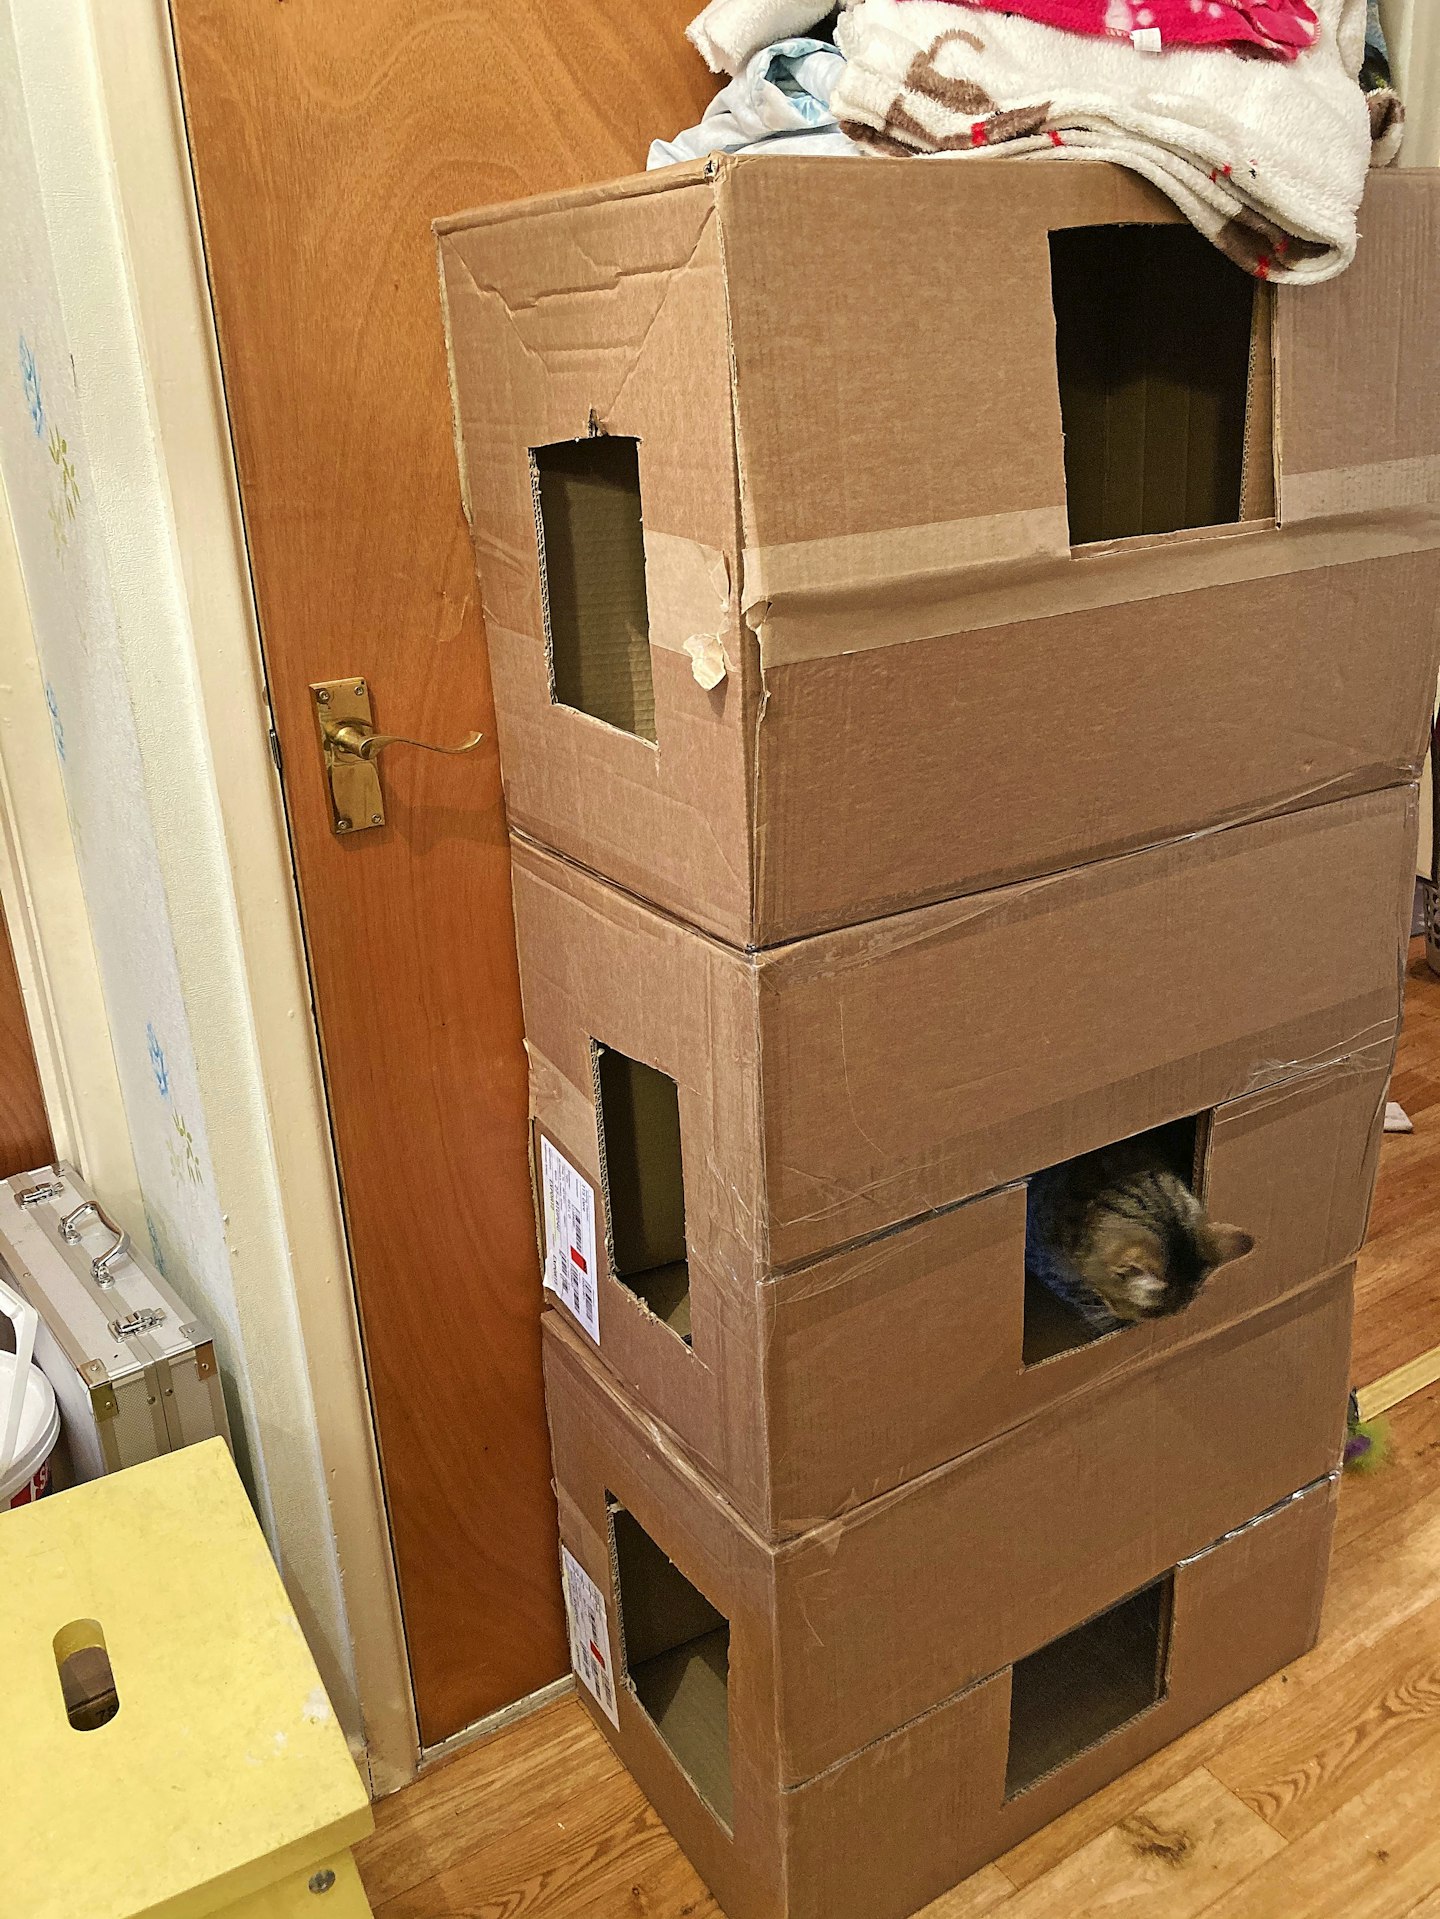 Cardboard box playground for cats